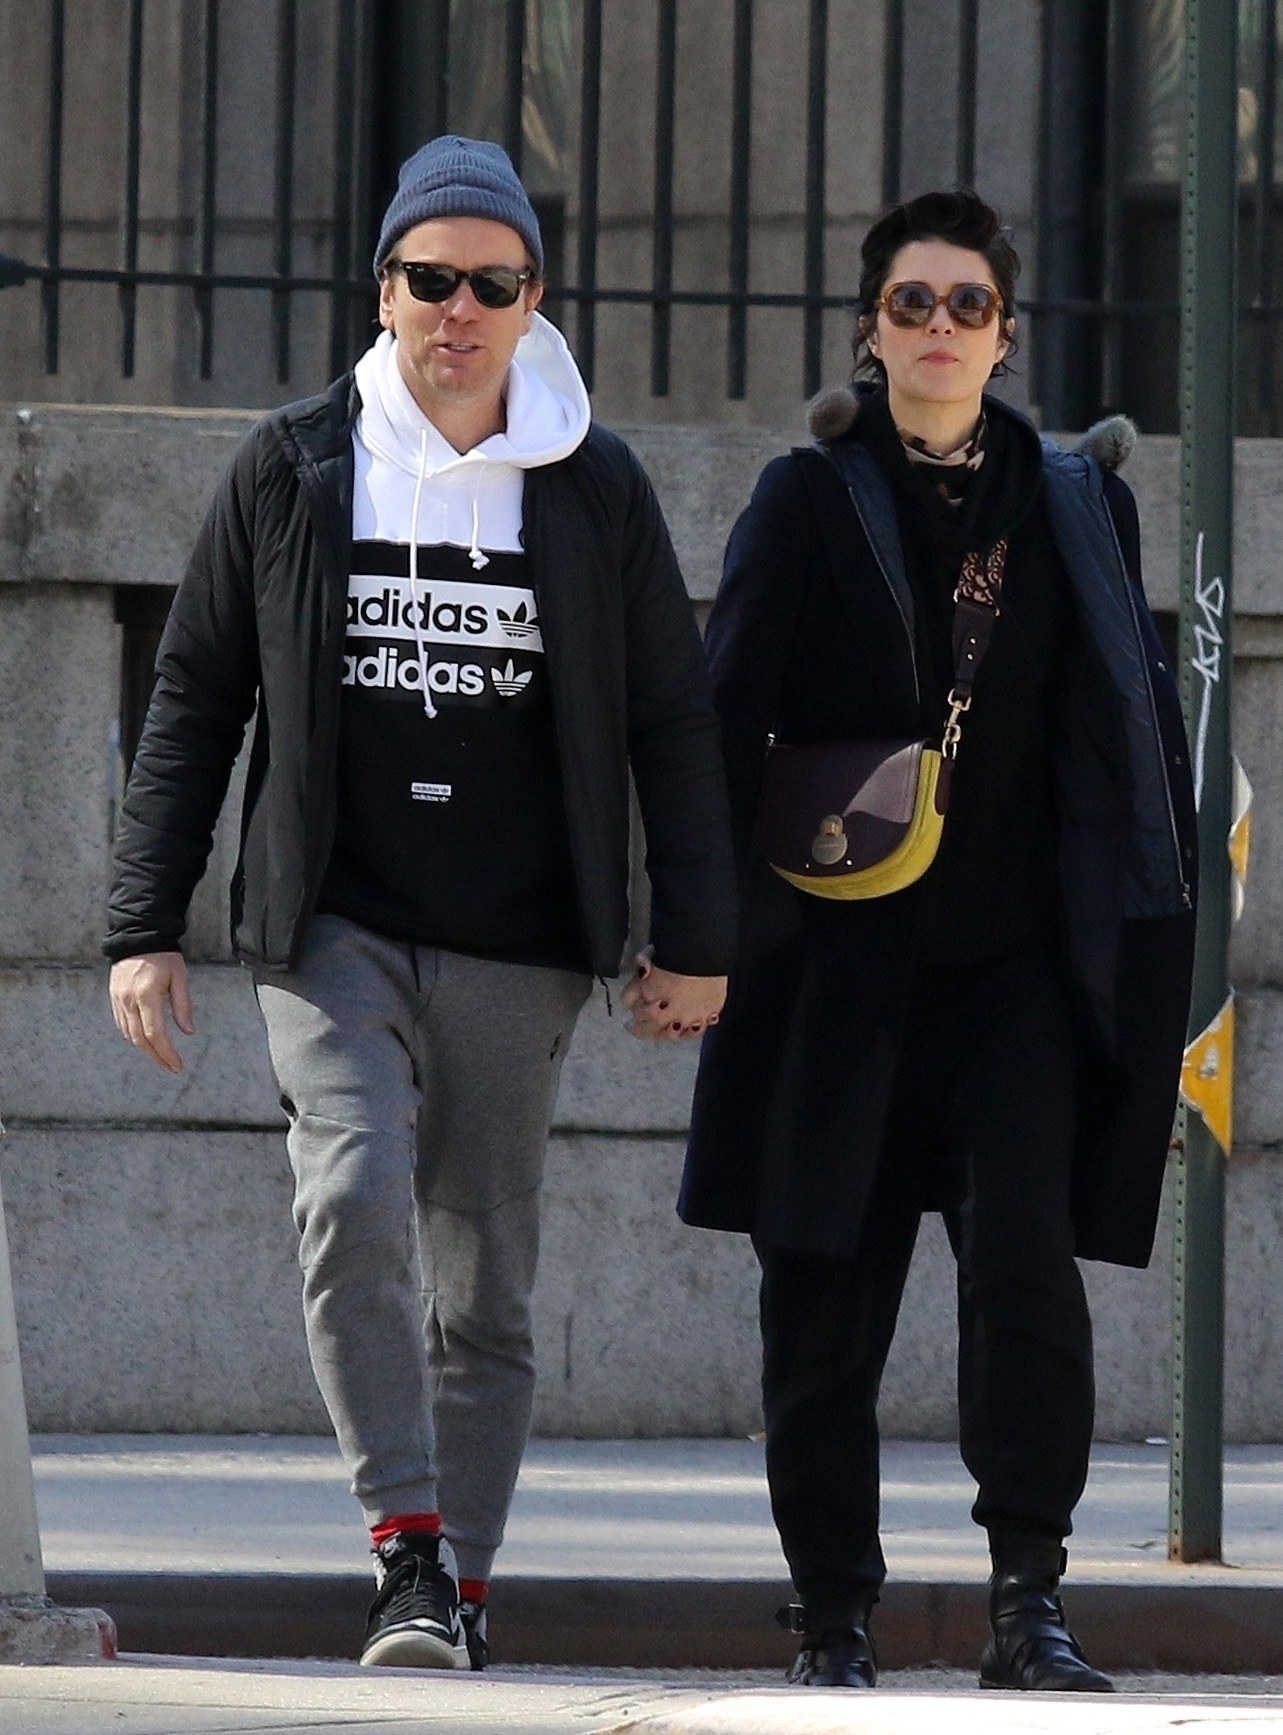 Ewan and Mary walk down the street together